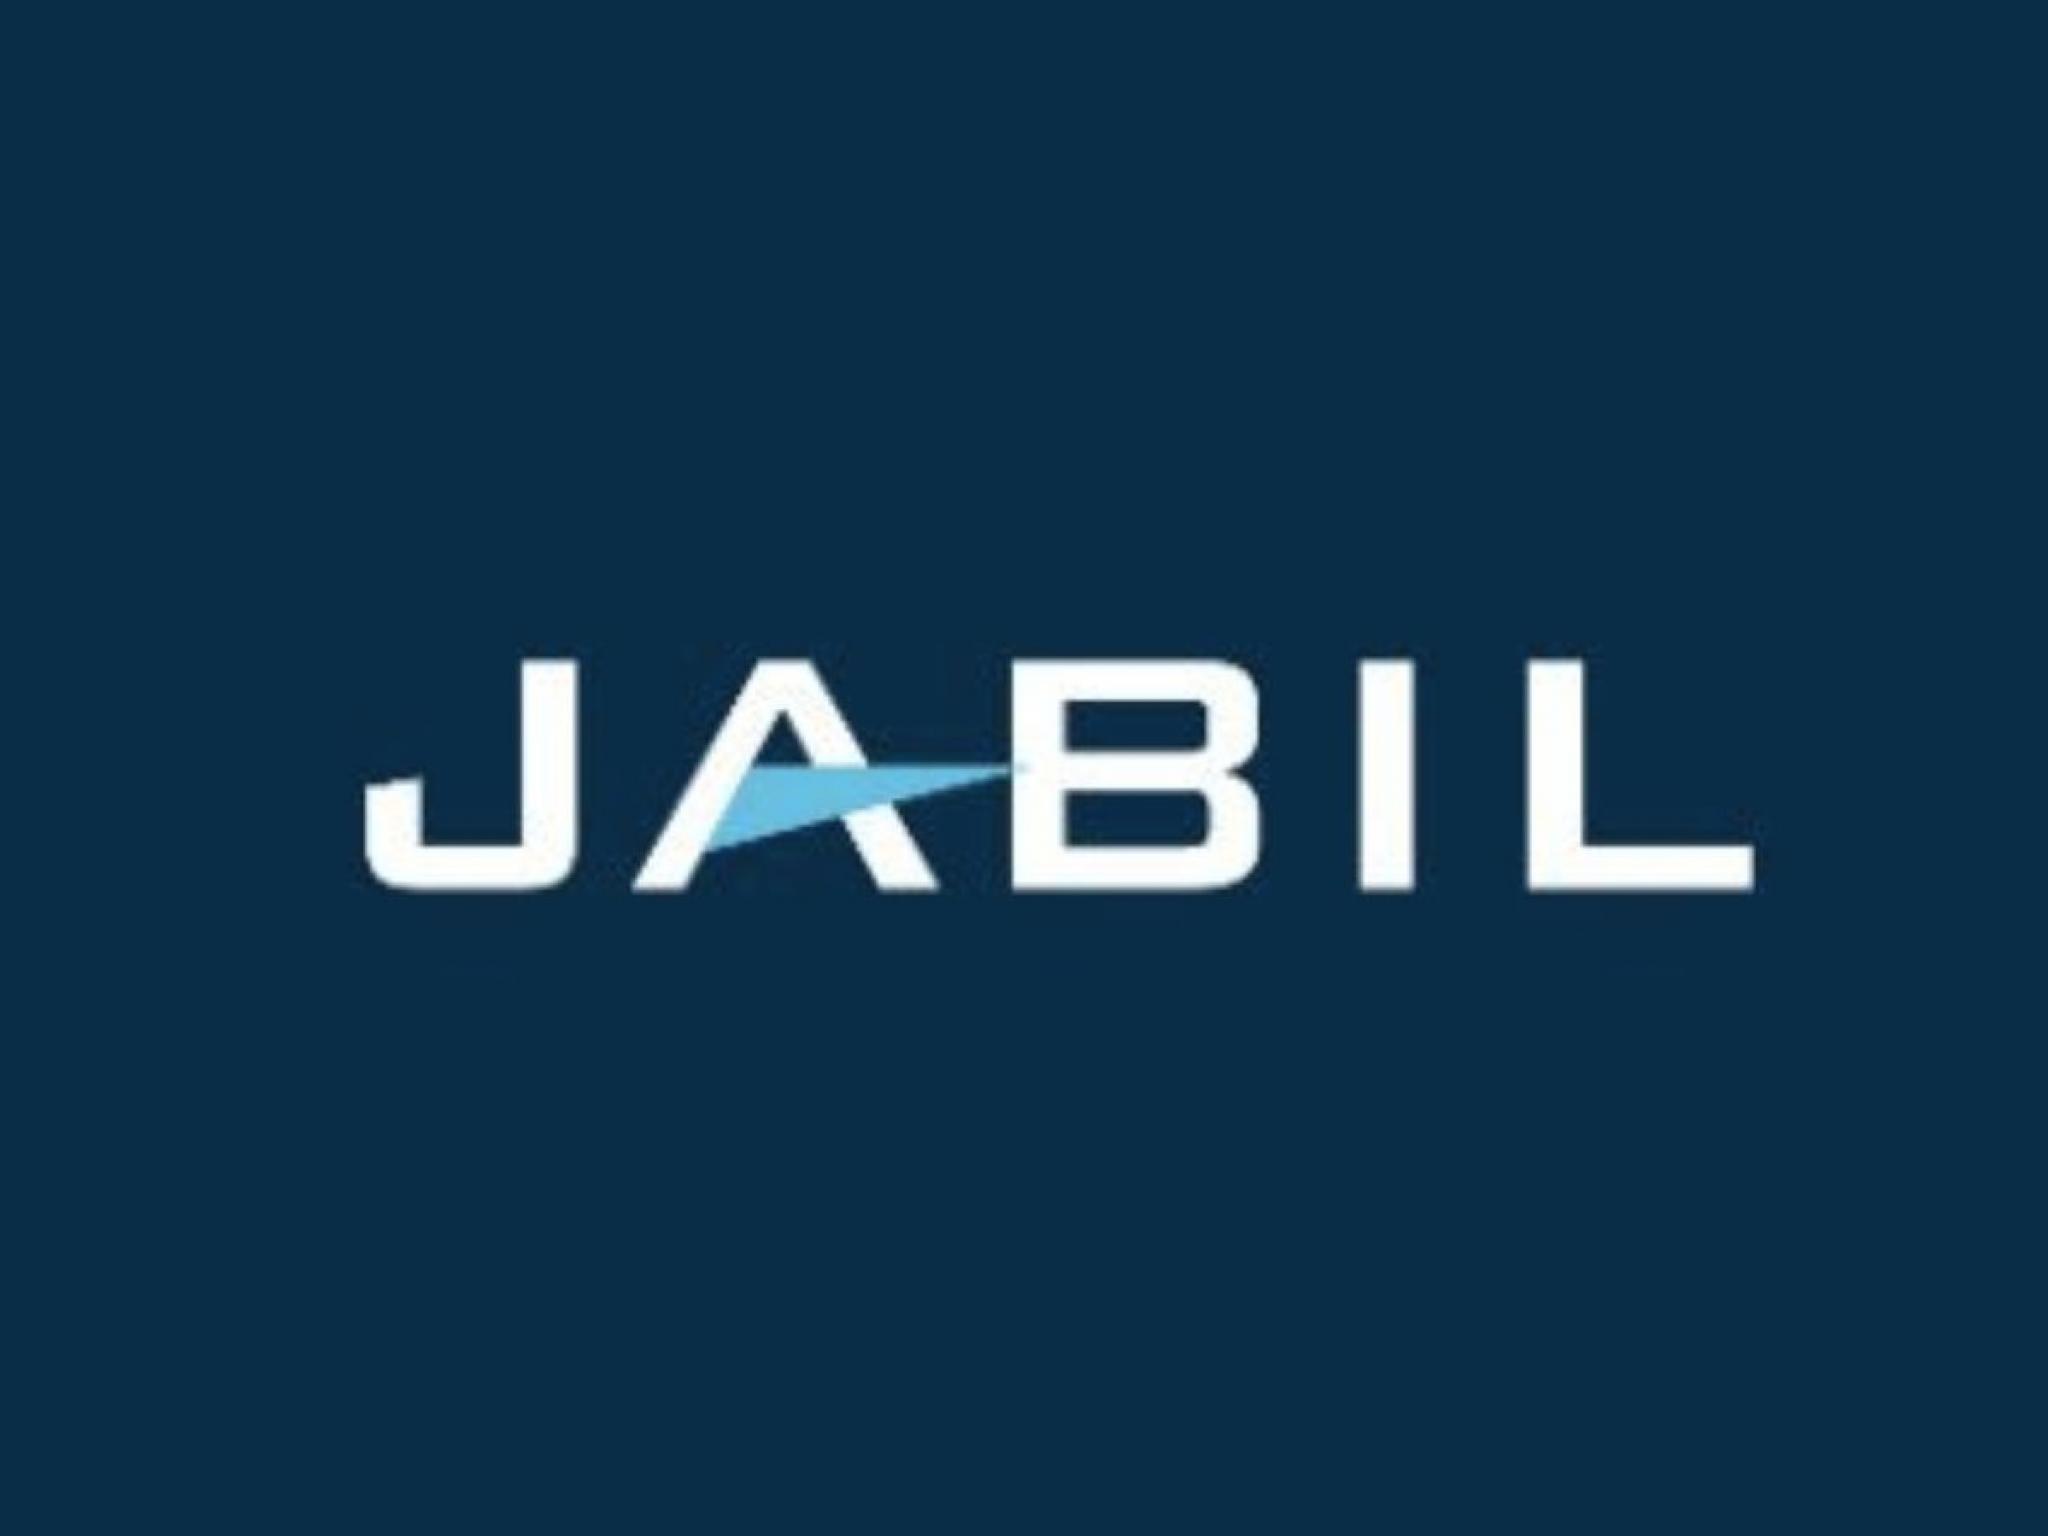  why-jabil-shares-are-trading-lower-by-over-14-here-are-other-stocks-moving-in-fridays-mid-day-session 